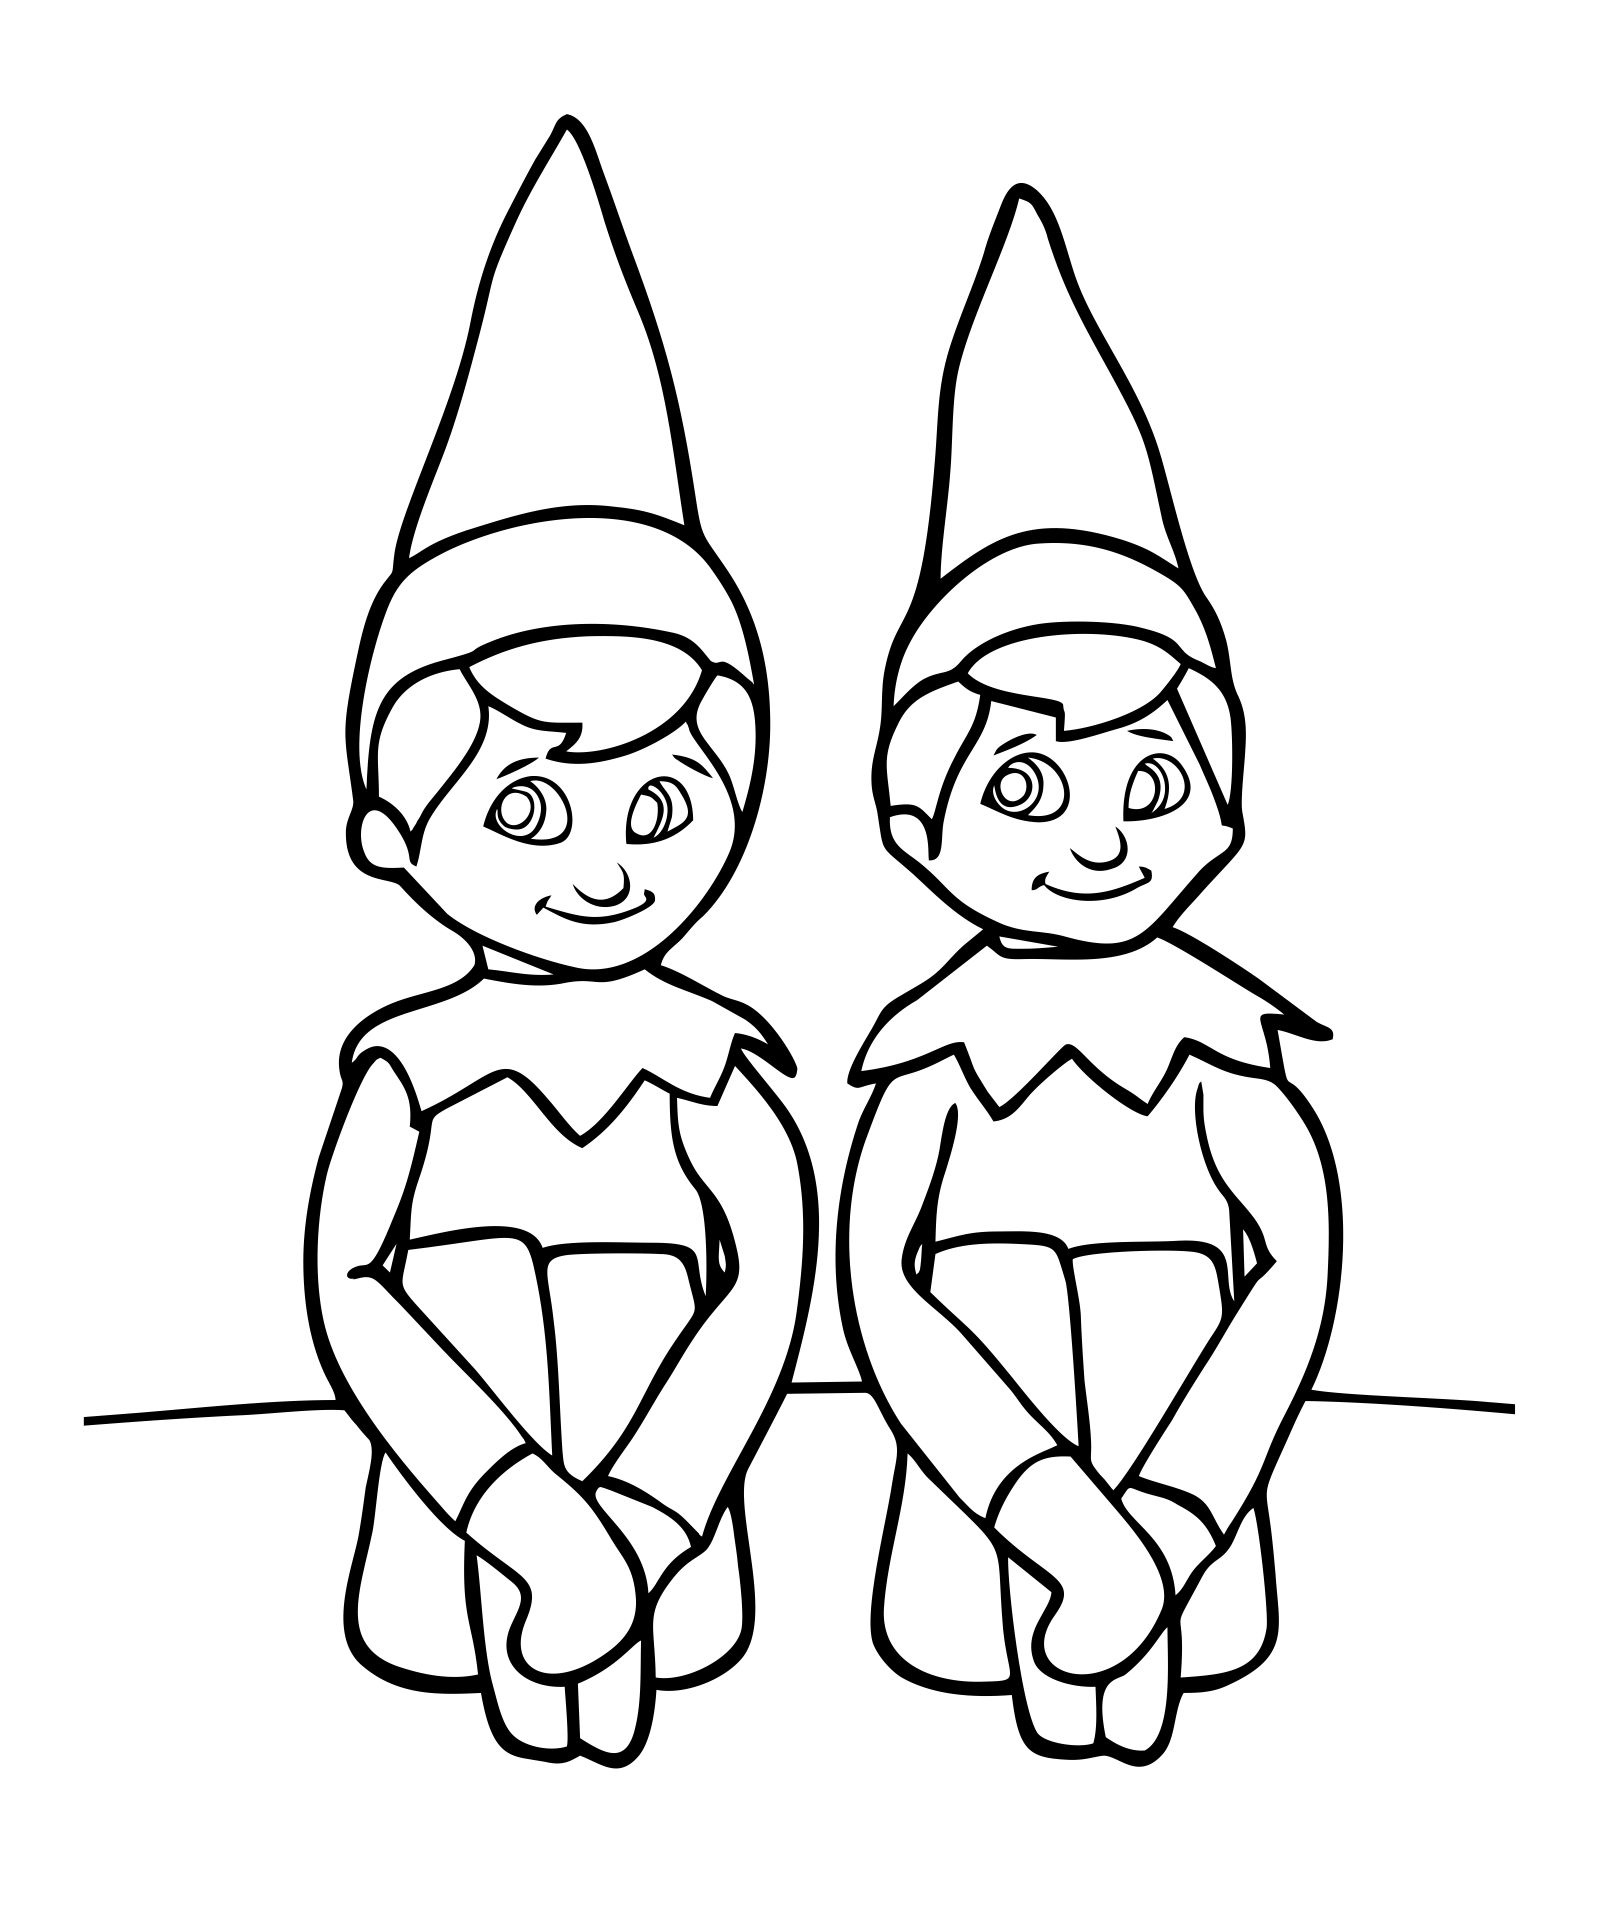 Printable Elf On Shelf Coloring Pages